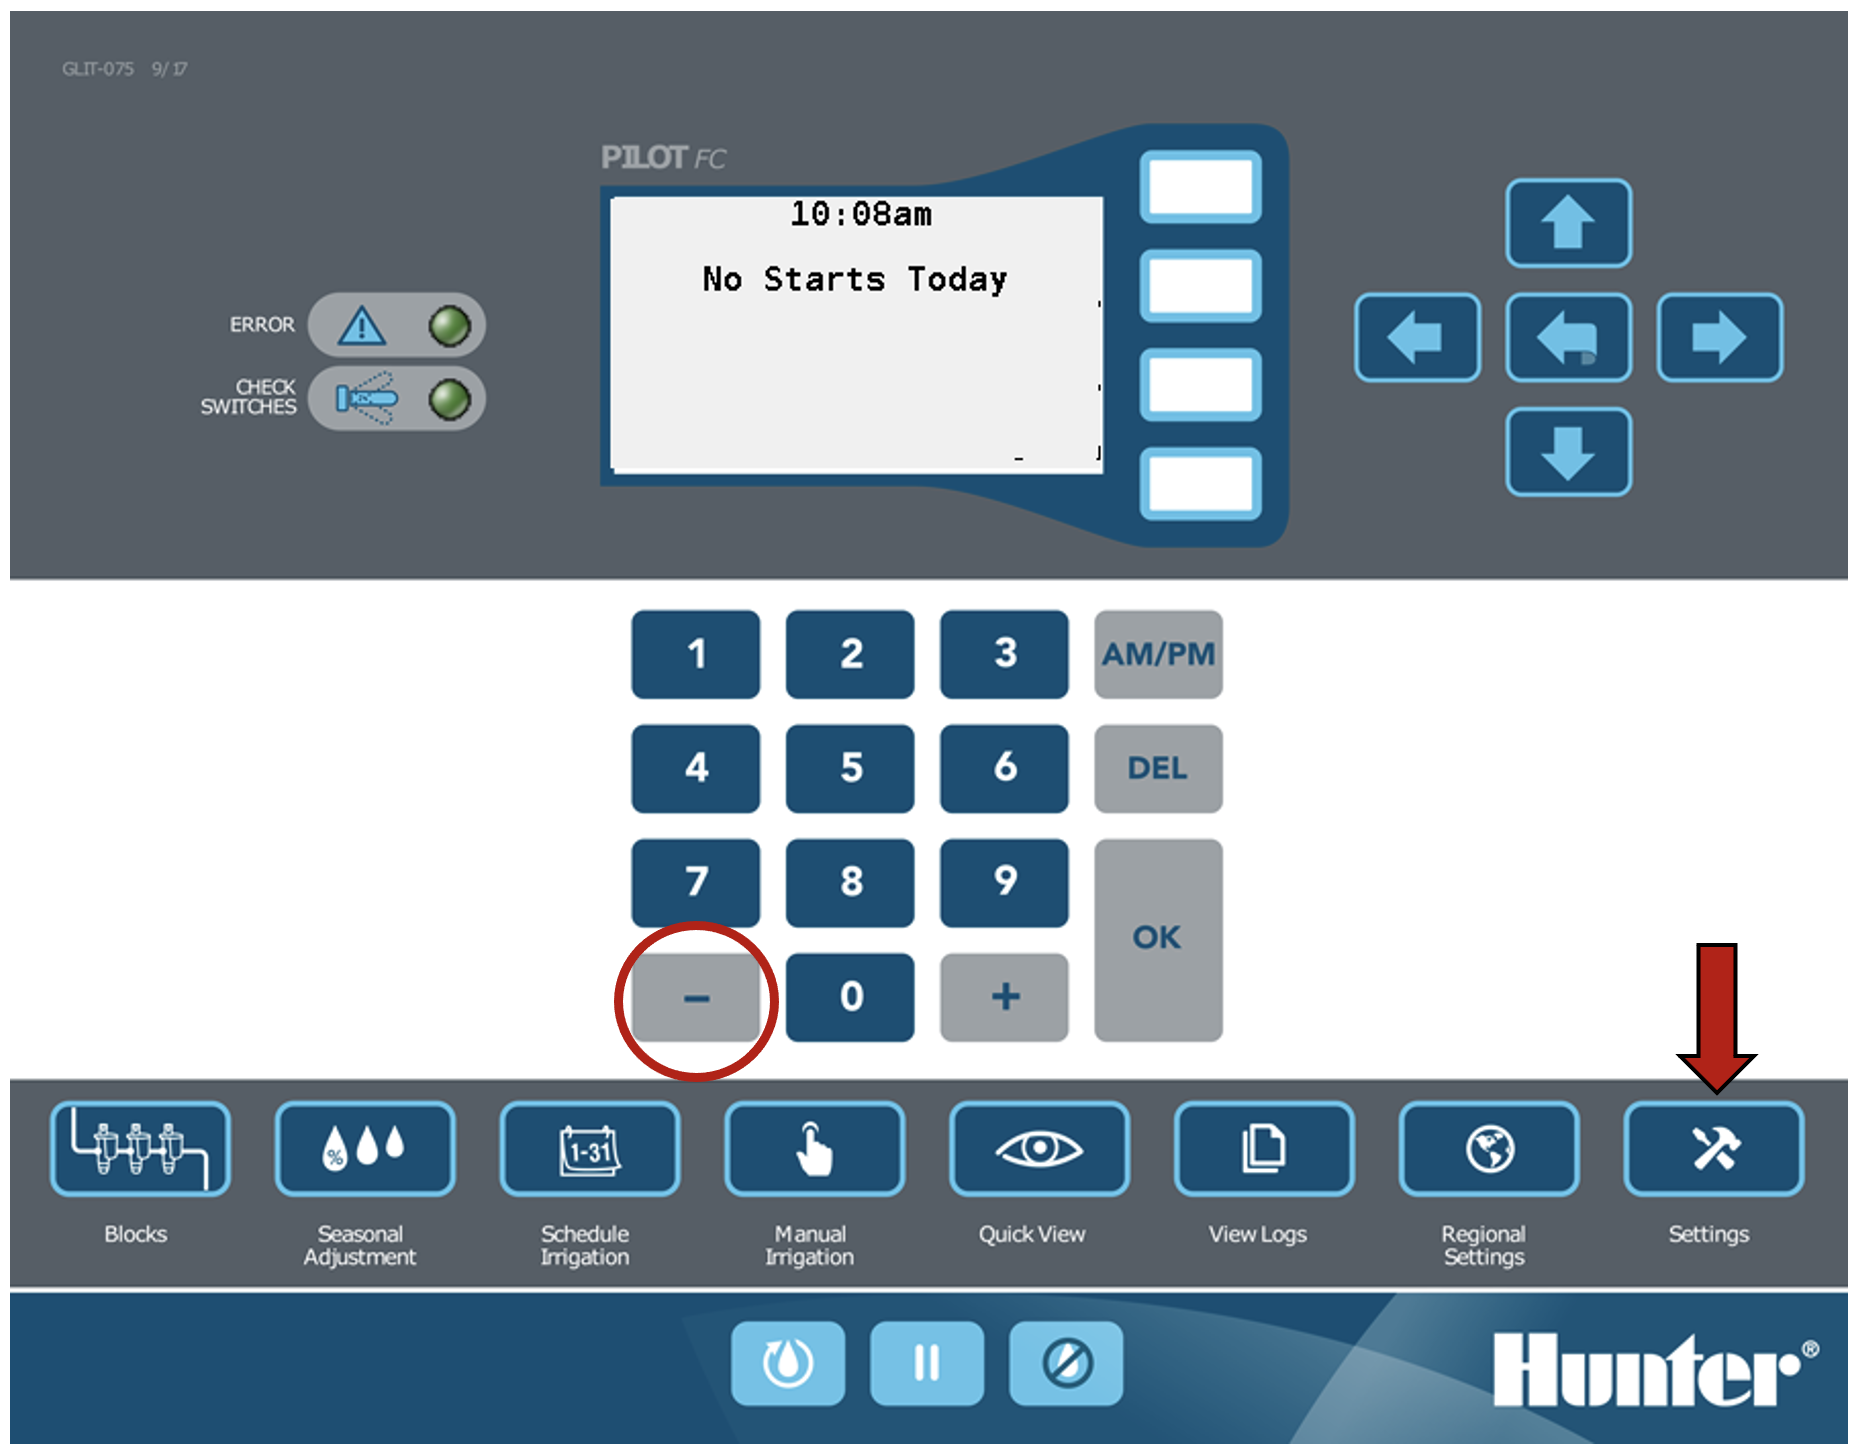 Image of the facepack, highlighting the Settings button and the minus button.